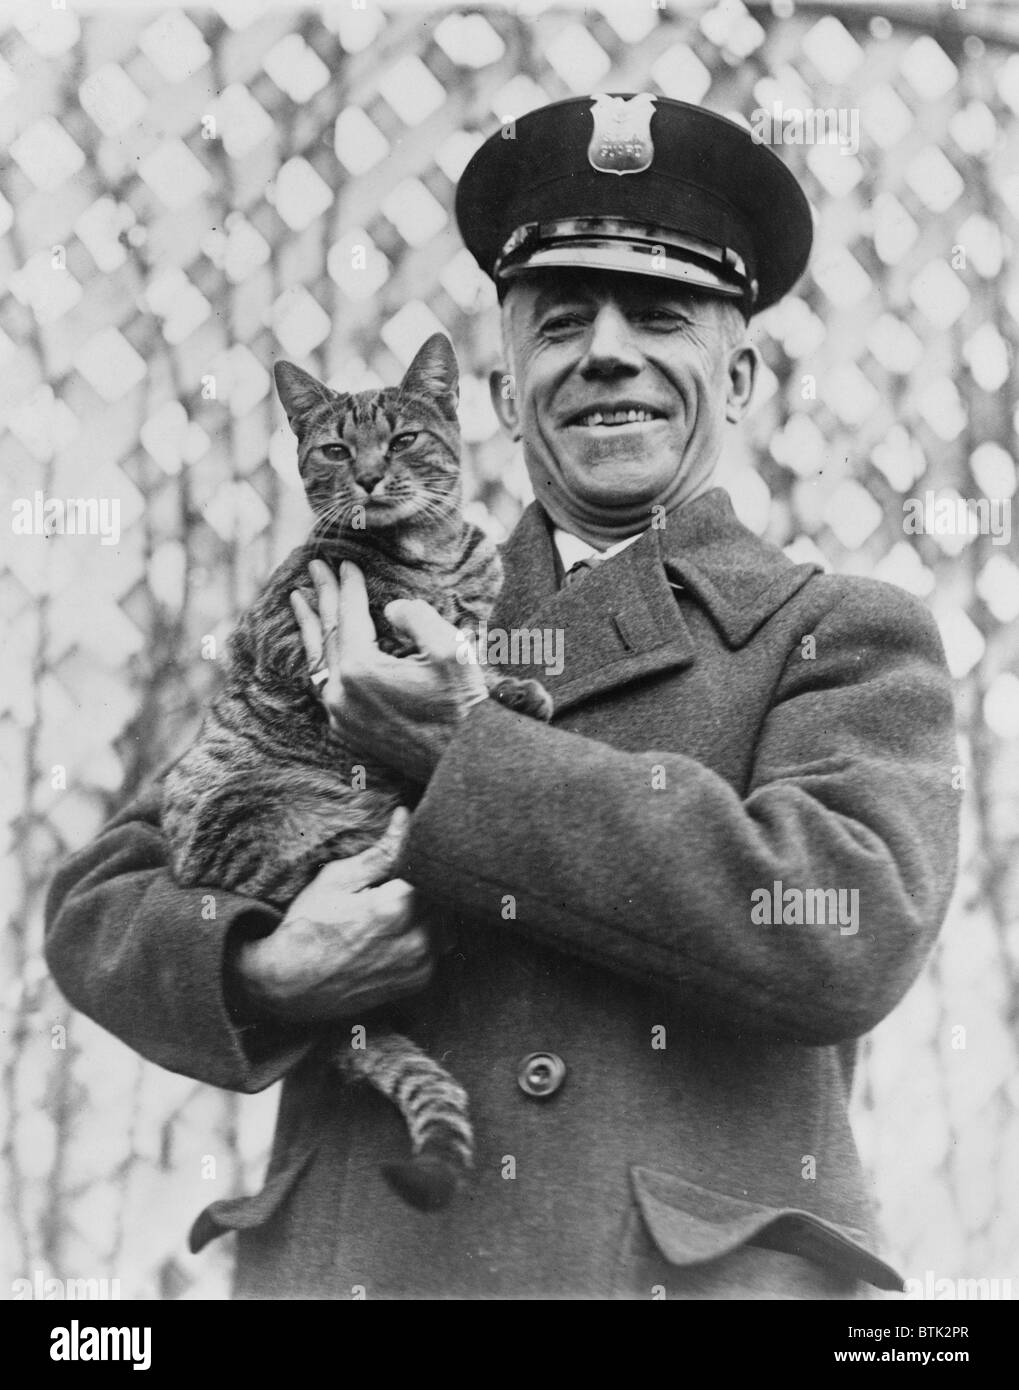 Tige, the White House cat and pet of First Lady Grace Coolidge has been returned, Benjamin Fink, guard at the Navy Department found Tige promenading around the Navy Building and immediately returned him to the White House, Tige's disappearance was broadcasted by Washington DC, radio stations, photograph, circa March 25, 1924 Stock Photo